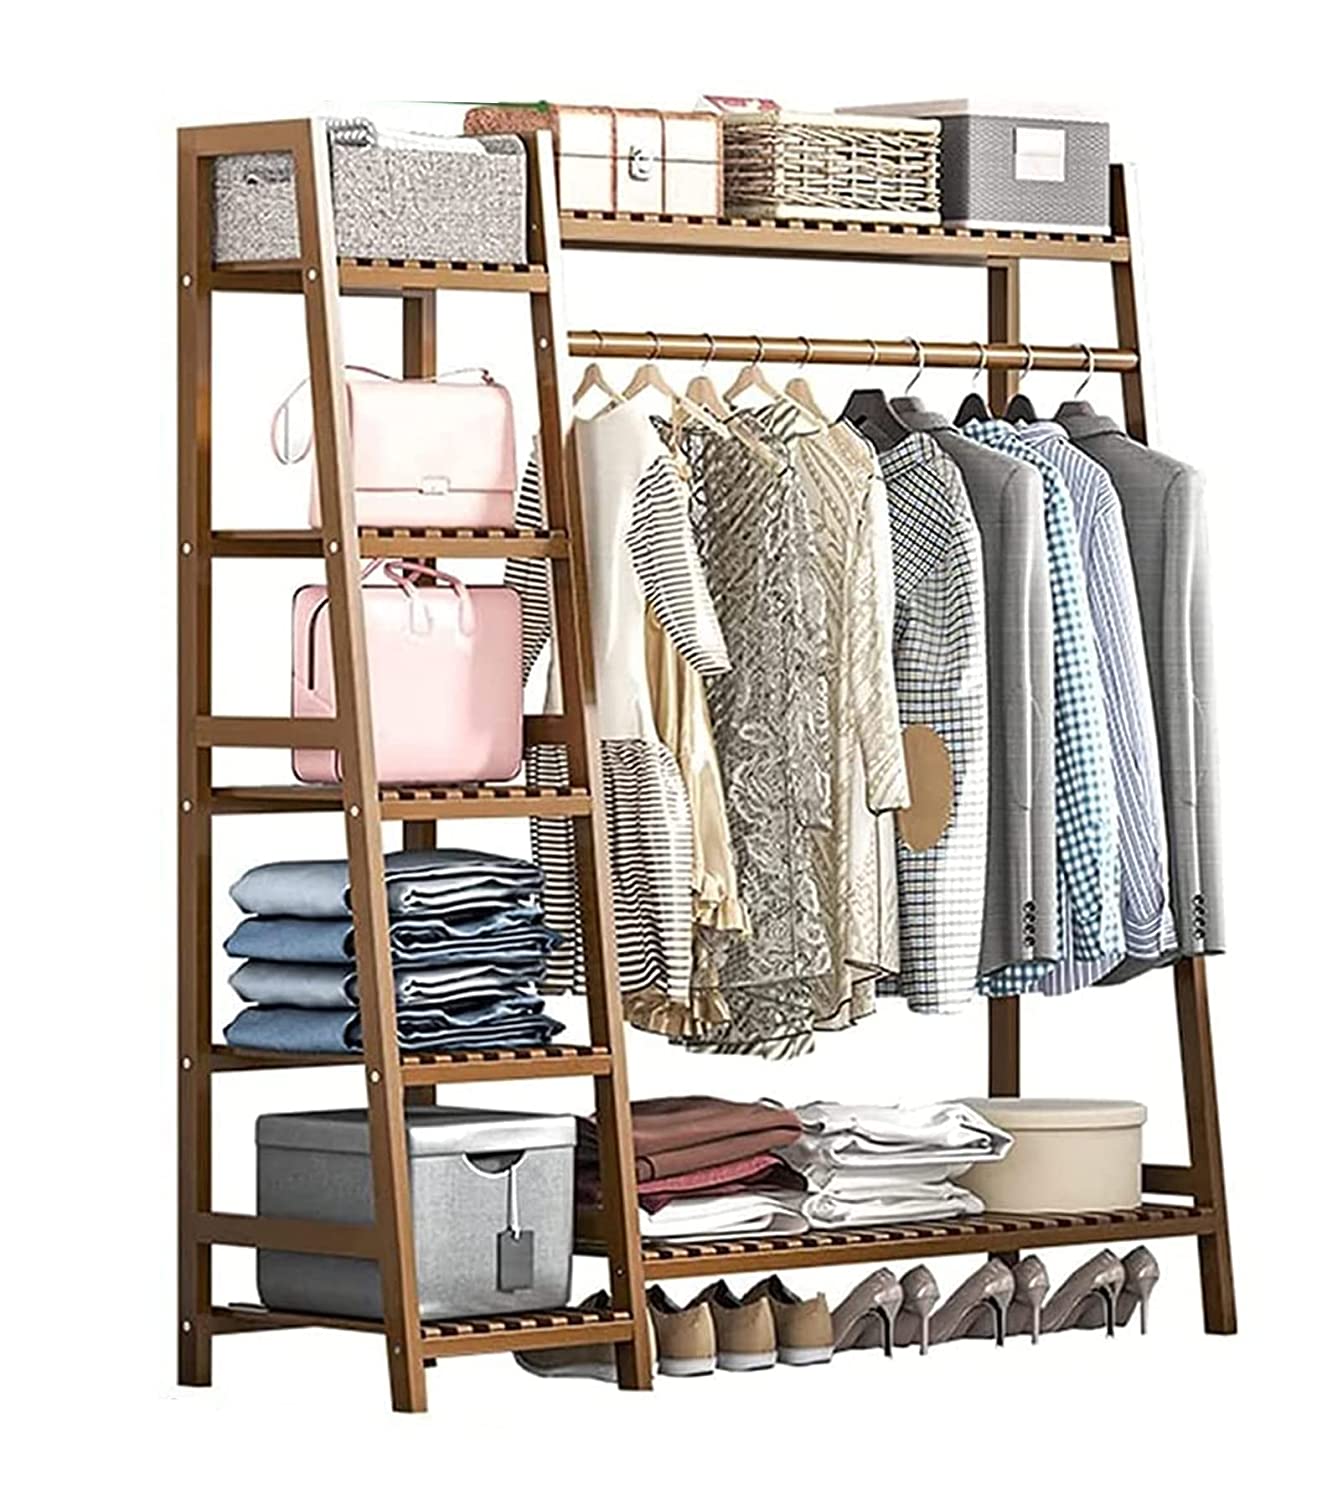 Wooden Clothing Rack with 5 Tiers(130x40x140cm)